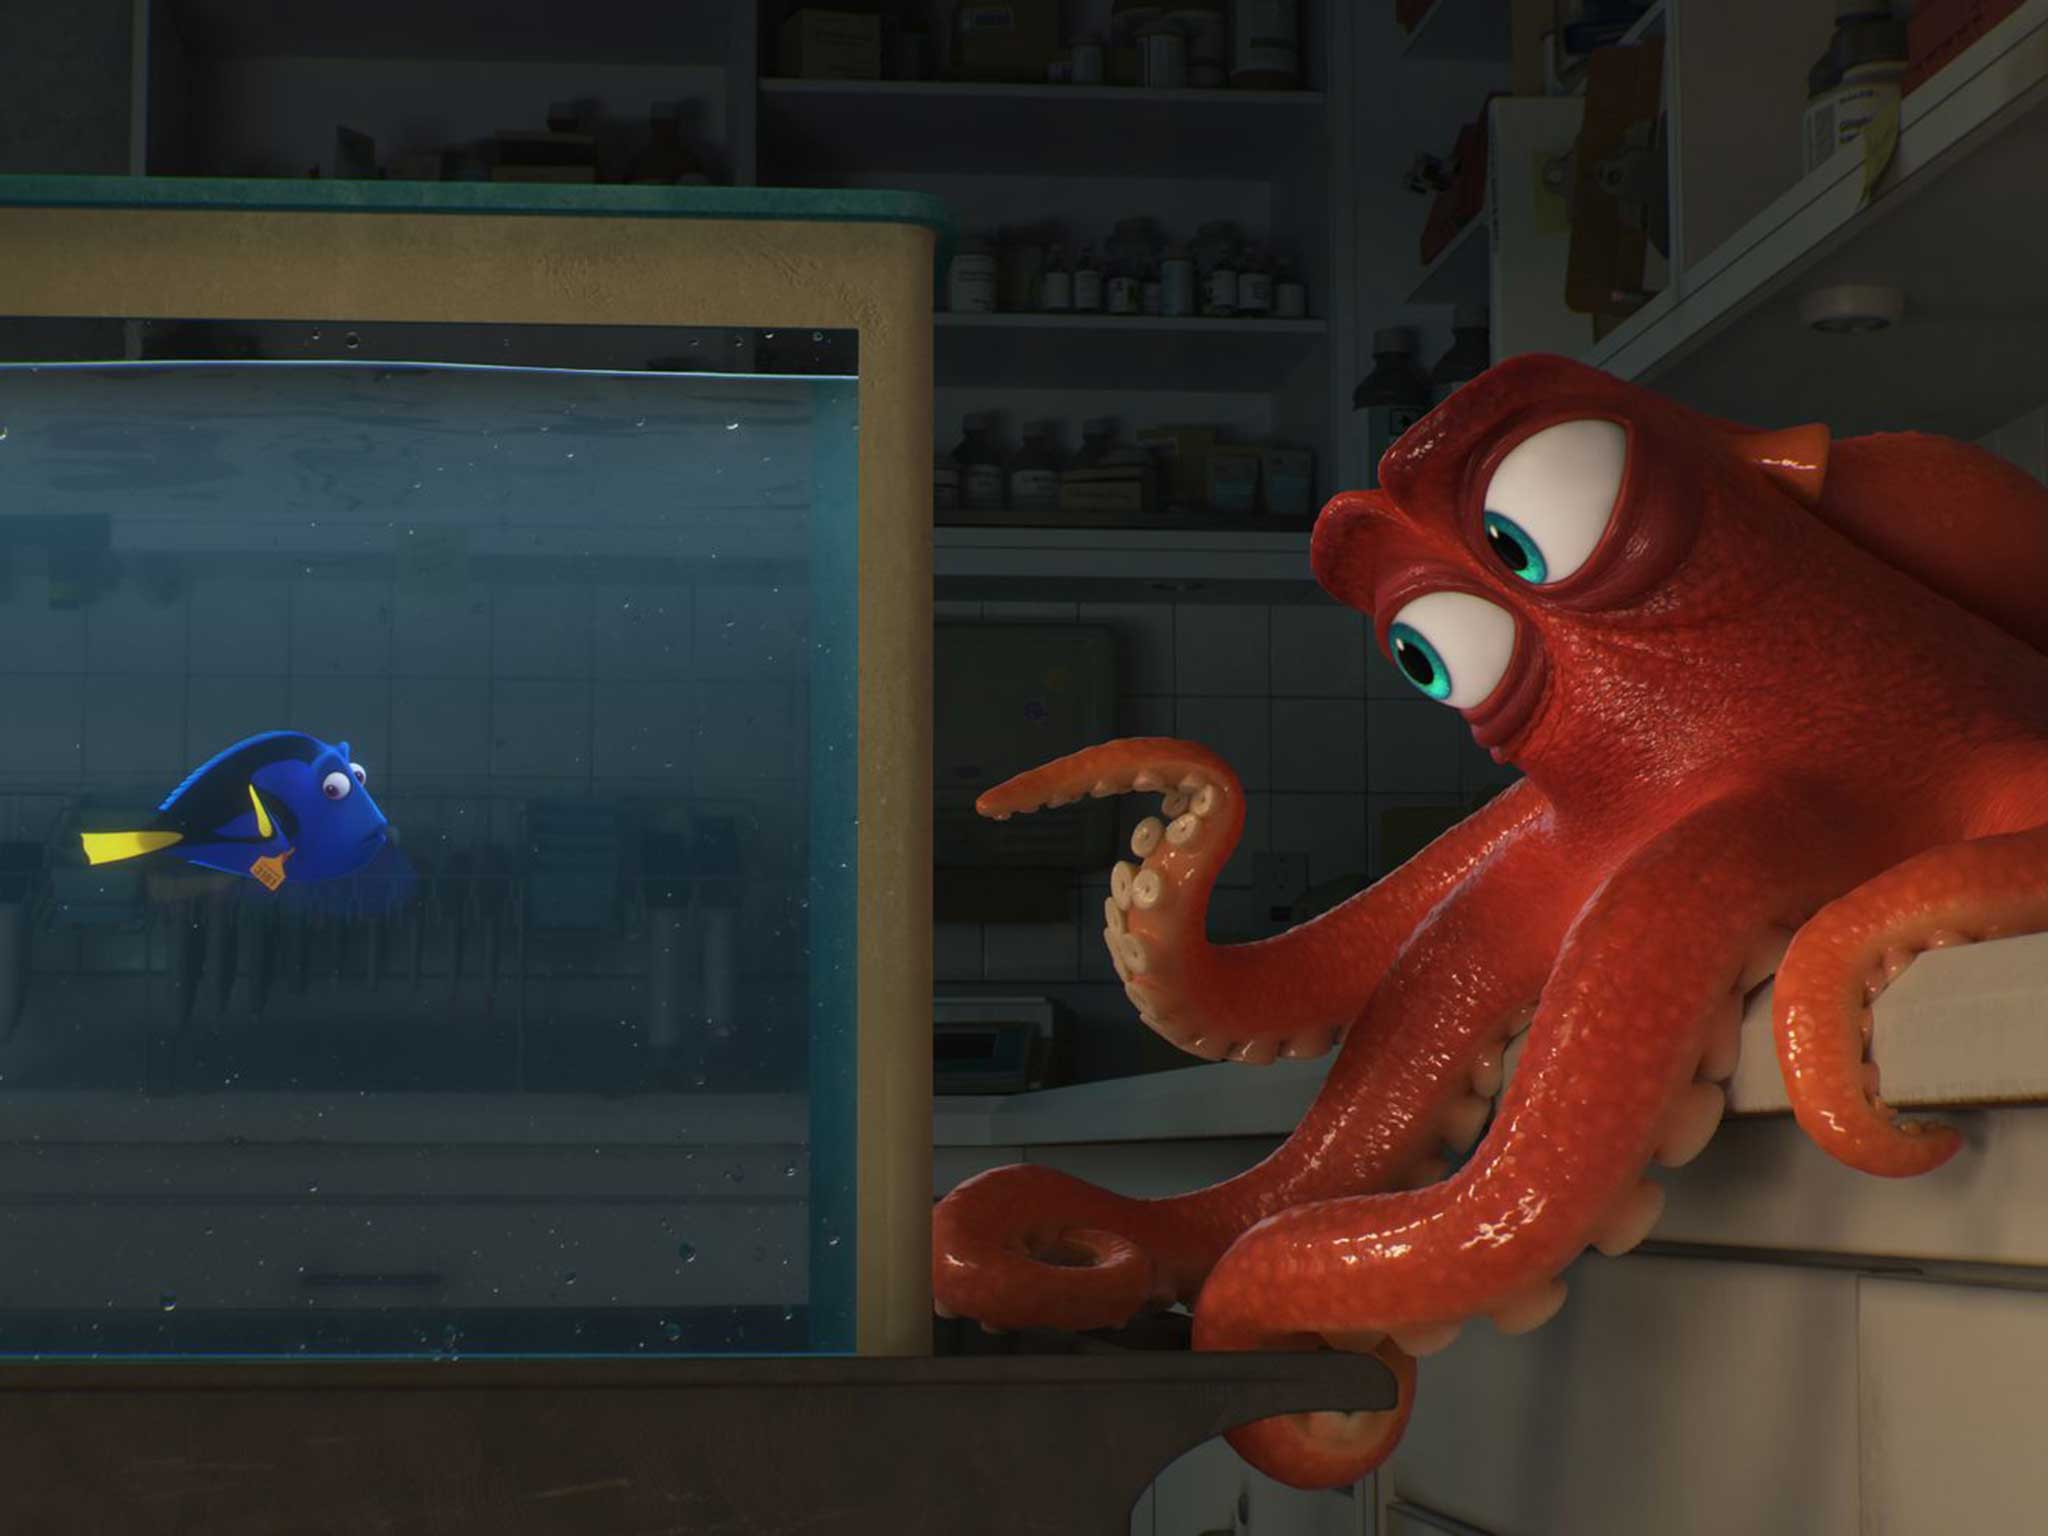 A still from the film released by Disney Pixar showing new character Hank and Dory